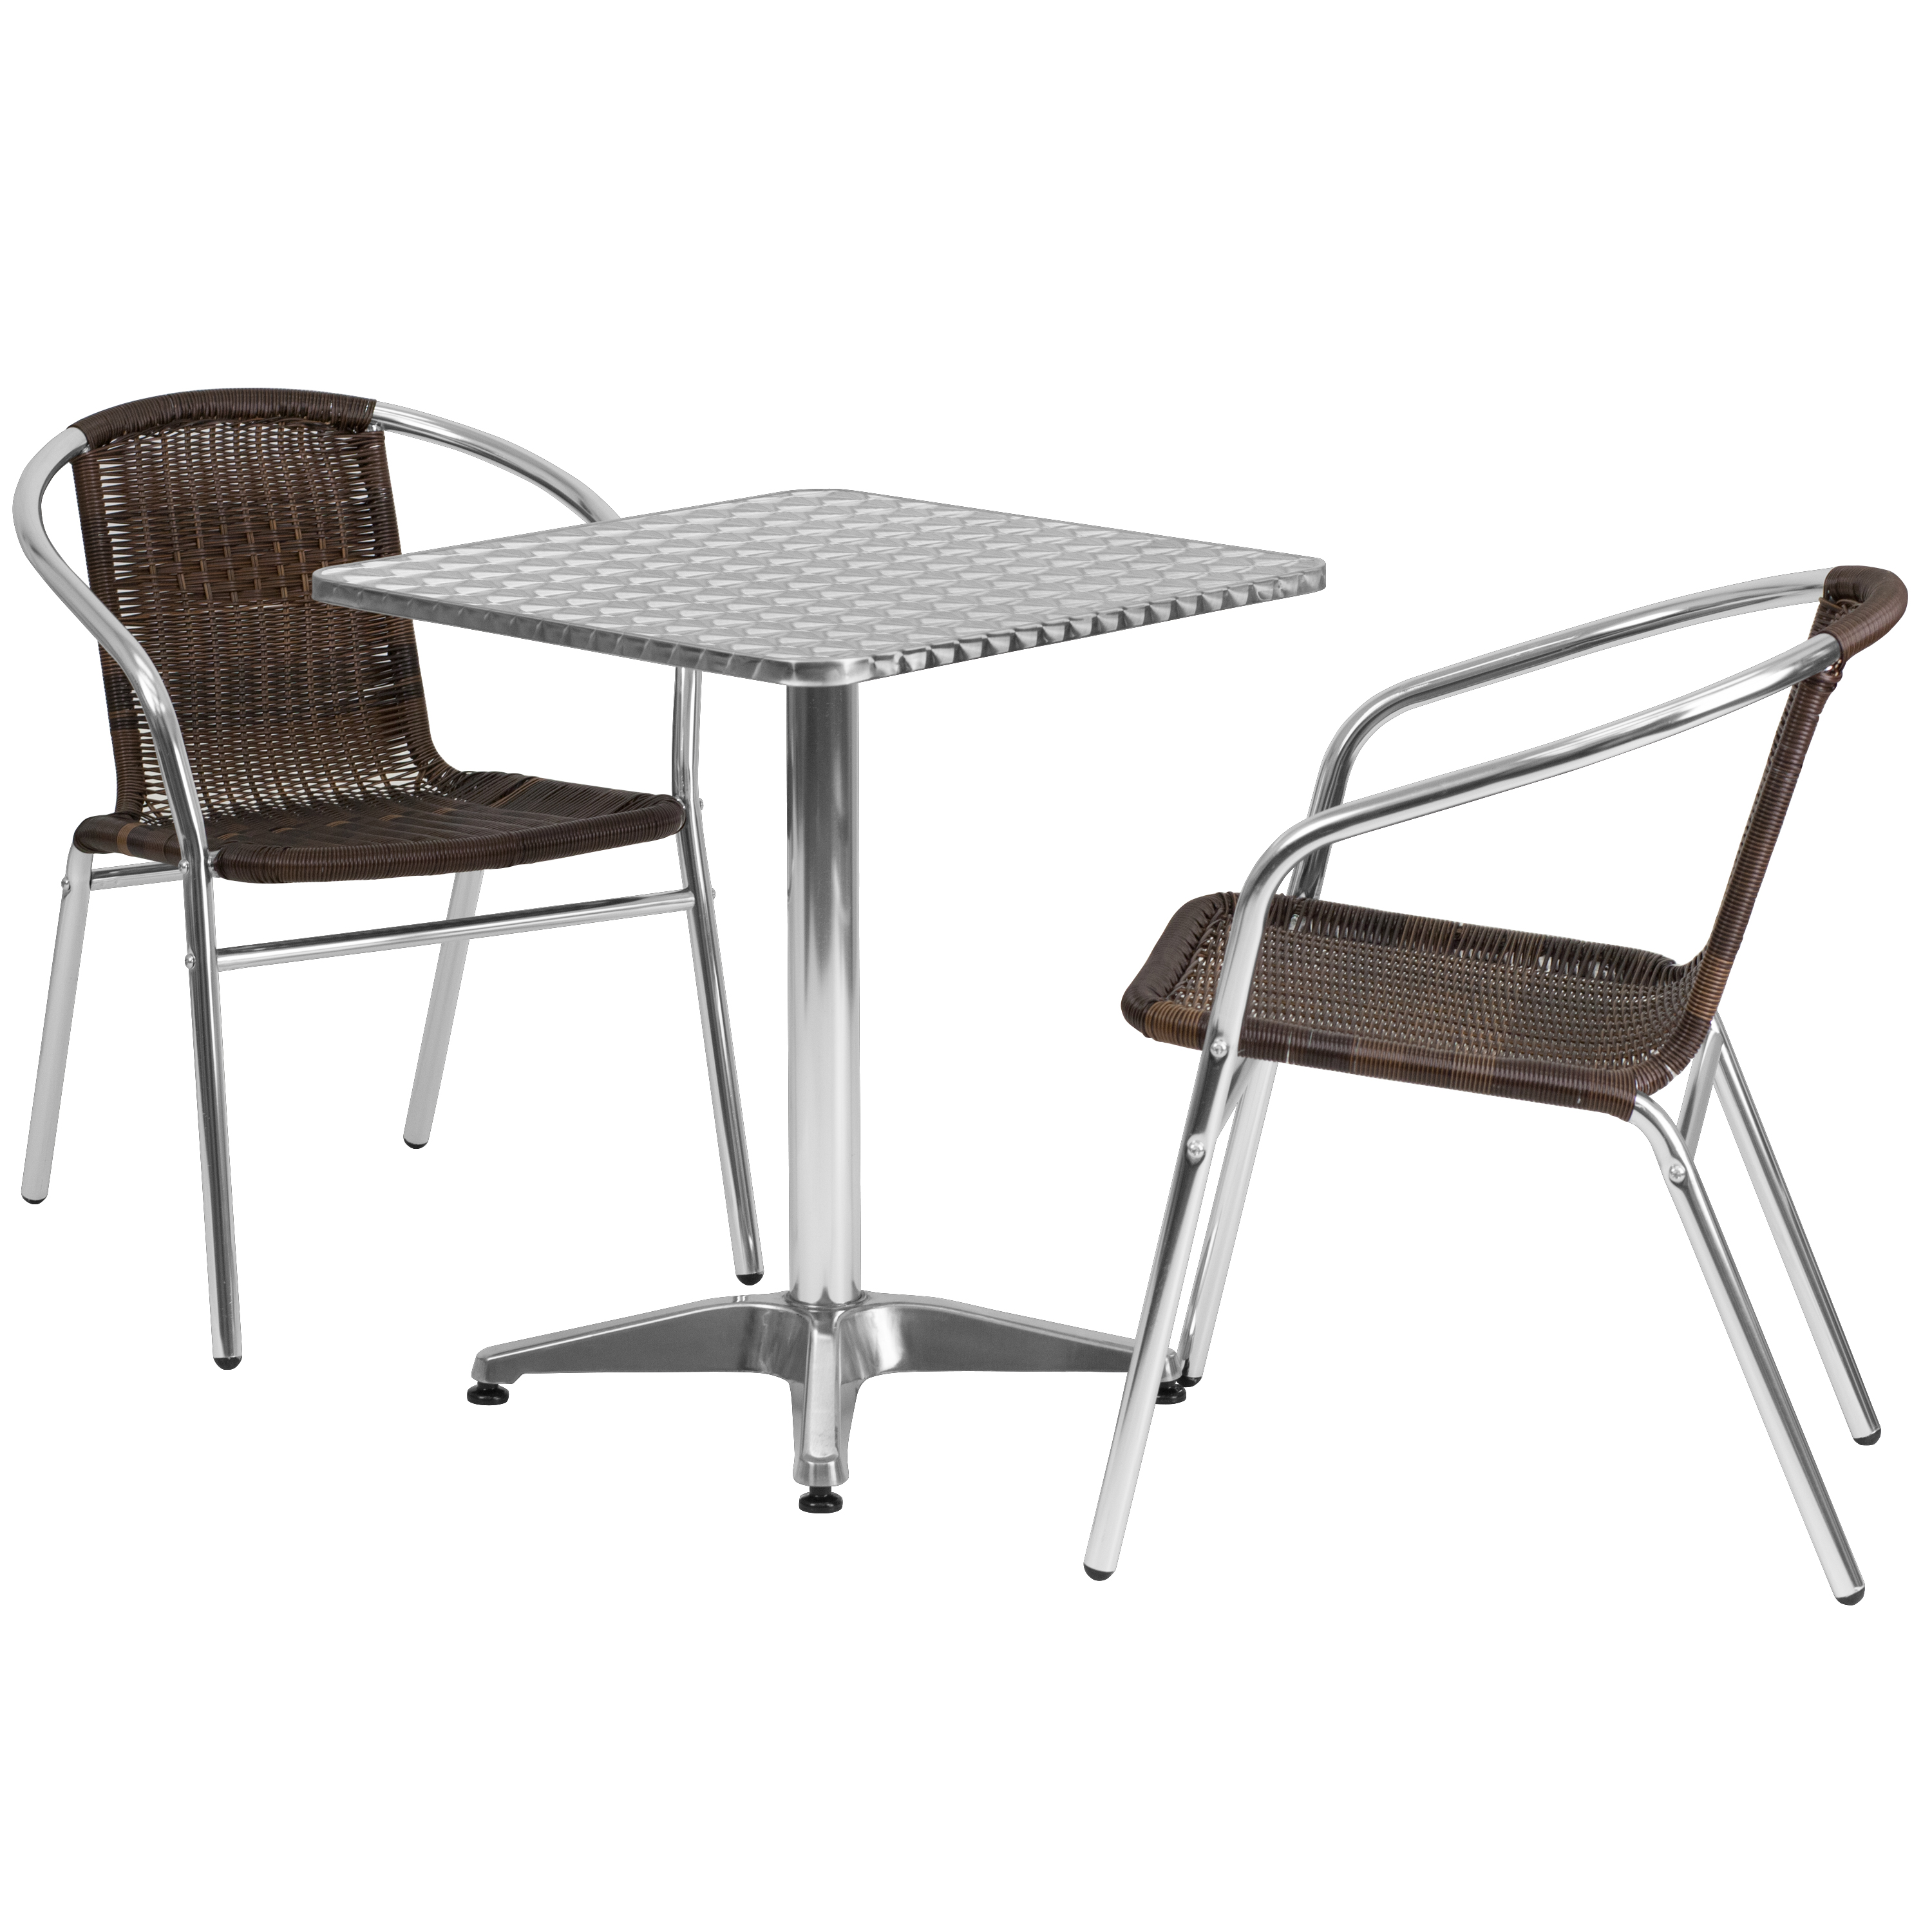 Flash Furniture Lila 23.5'' Square Aluminum Indoor-Outdoor Table Set with 2 Dark Brown Rattan Chairs - image 1 of 5